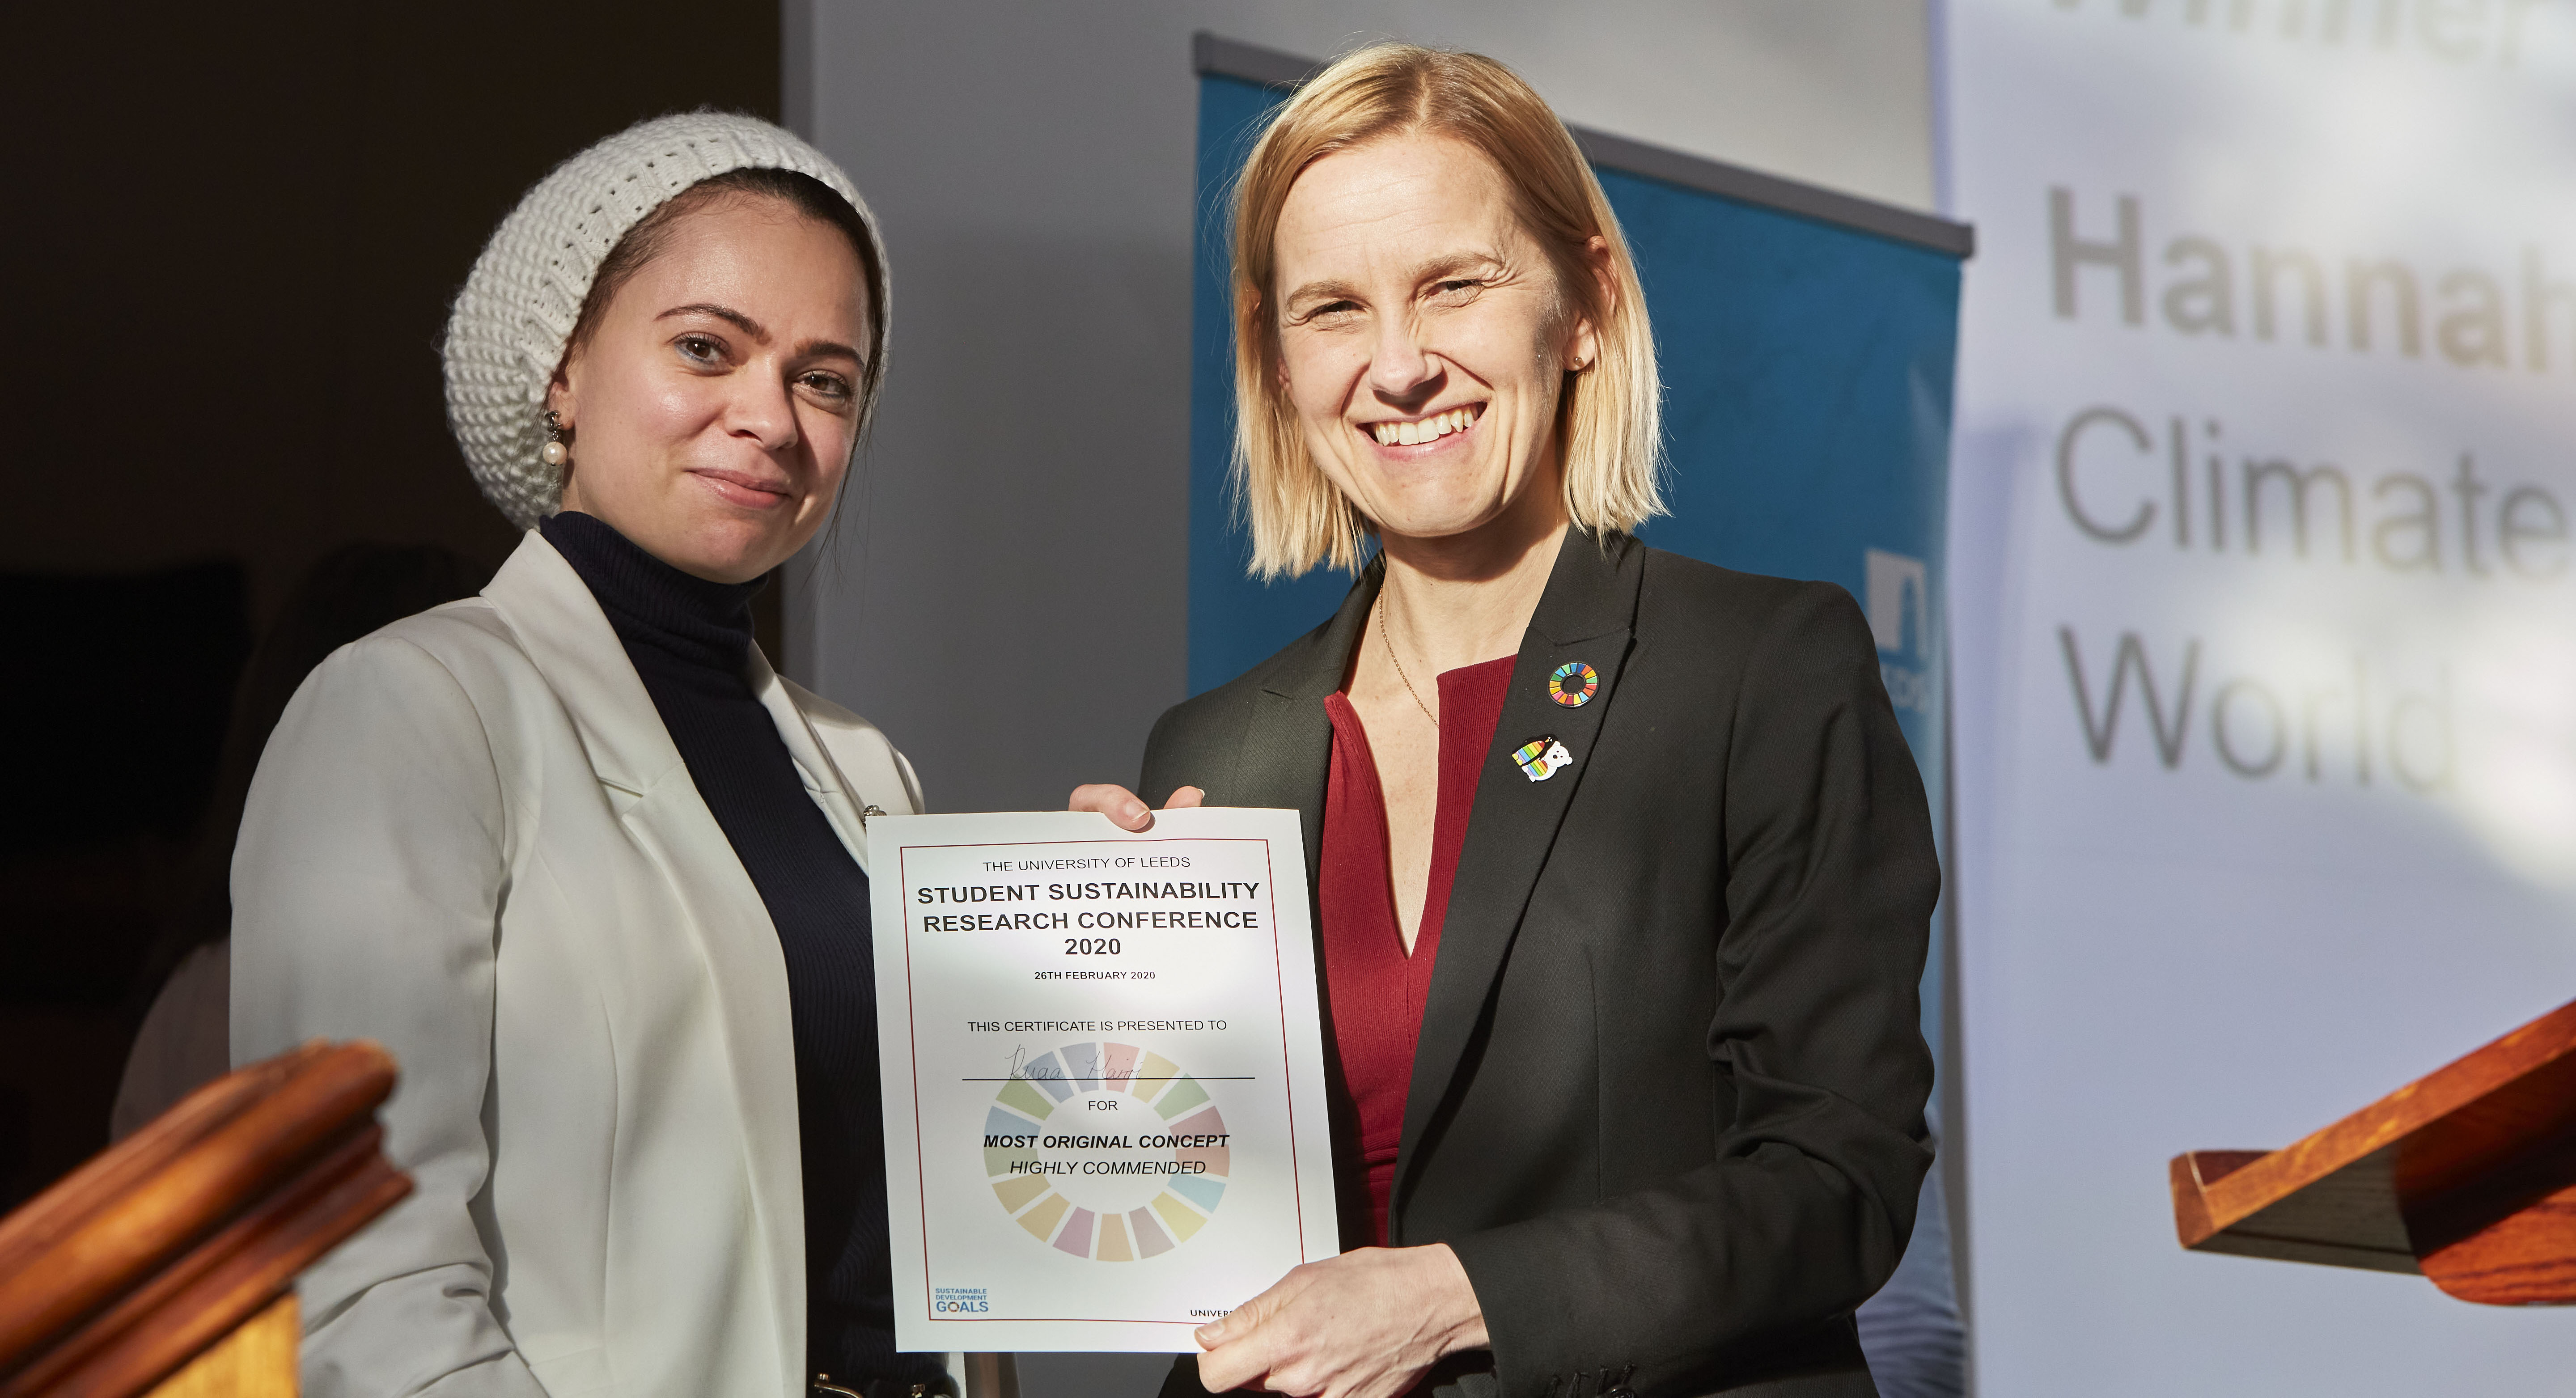 PGR student, Ruaa Hariri, awarded a ‘Highly Commended’ certificate for ‘The Most Original Concept’ at ‘The Student Sustainability Research Conference’